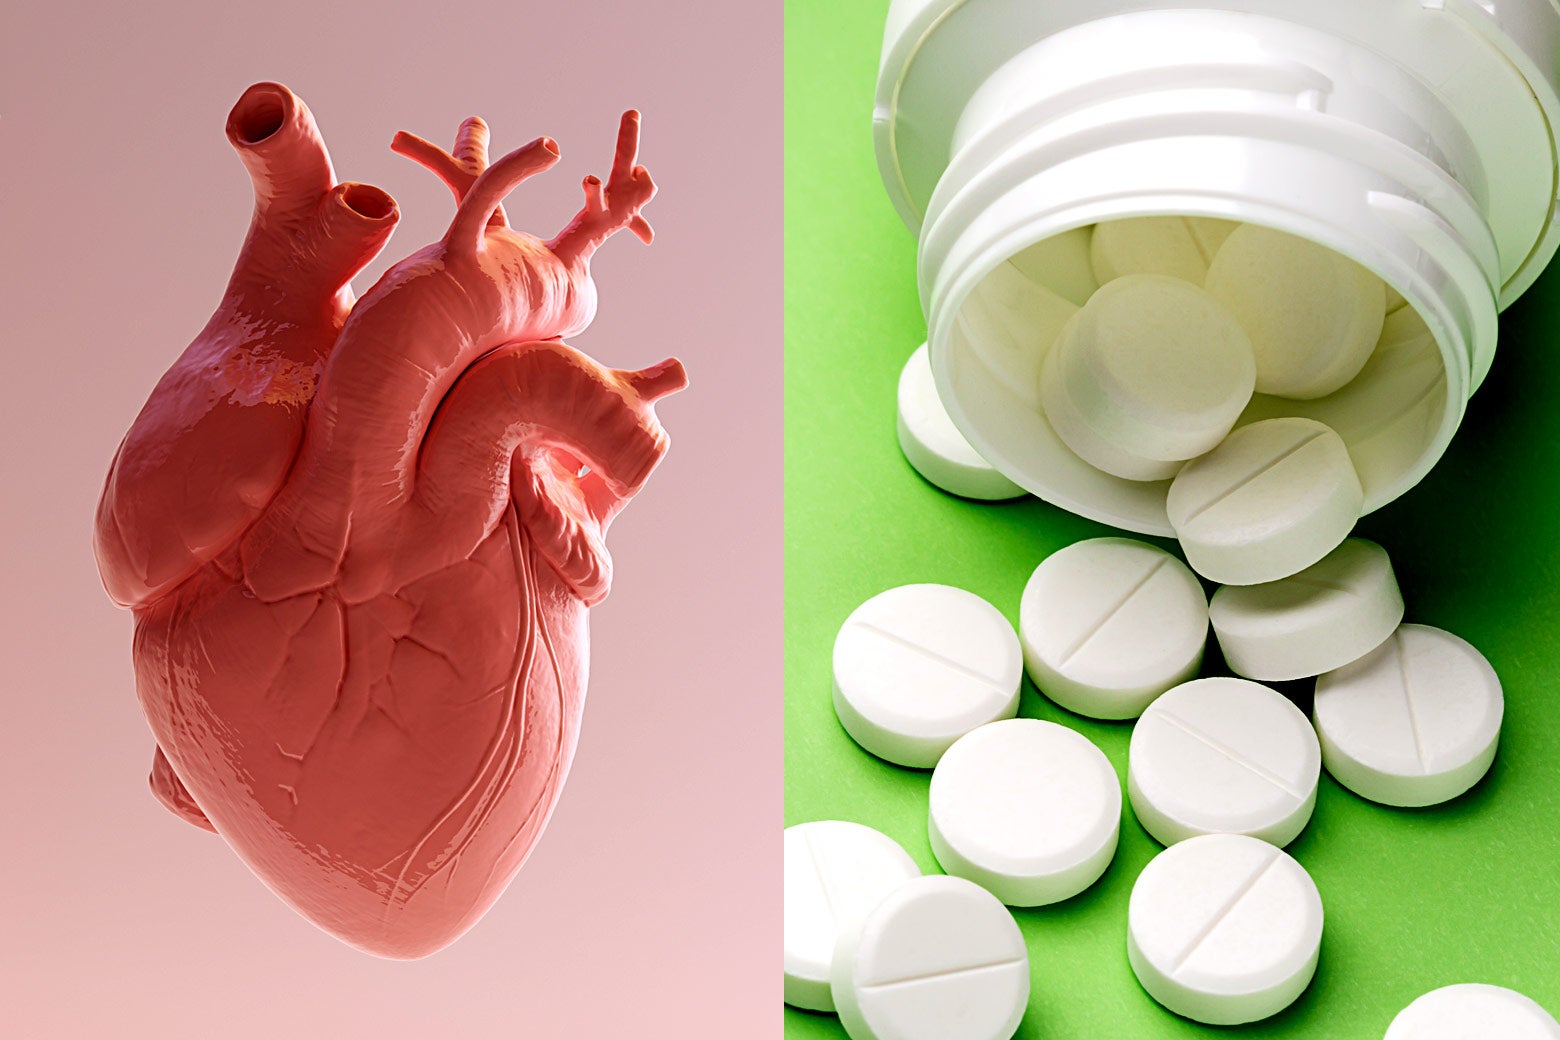 A side-by-side of a human heart and aspirin spilling out of a bottle.